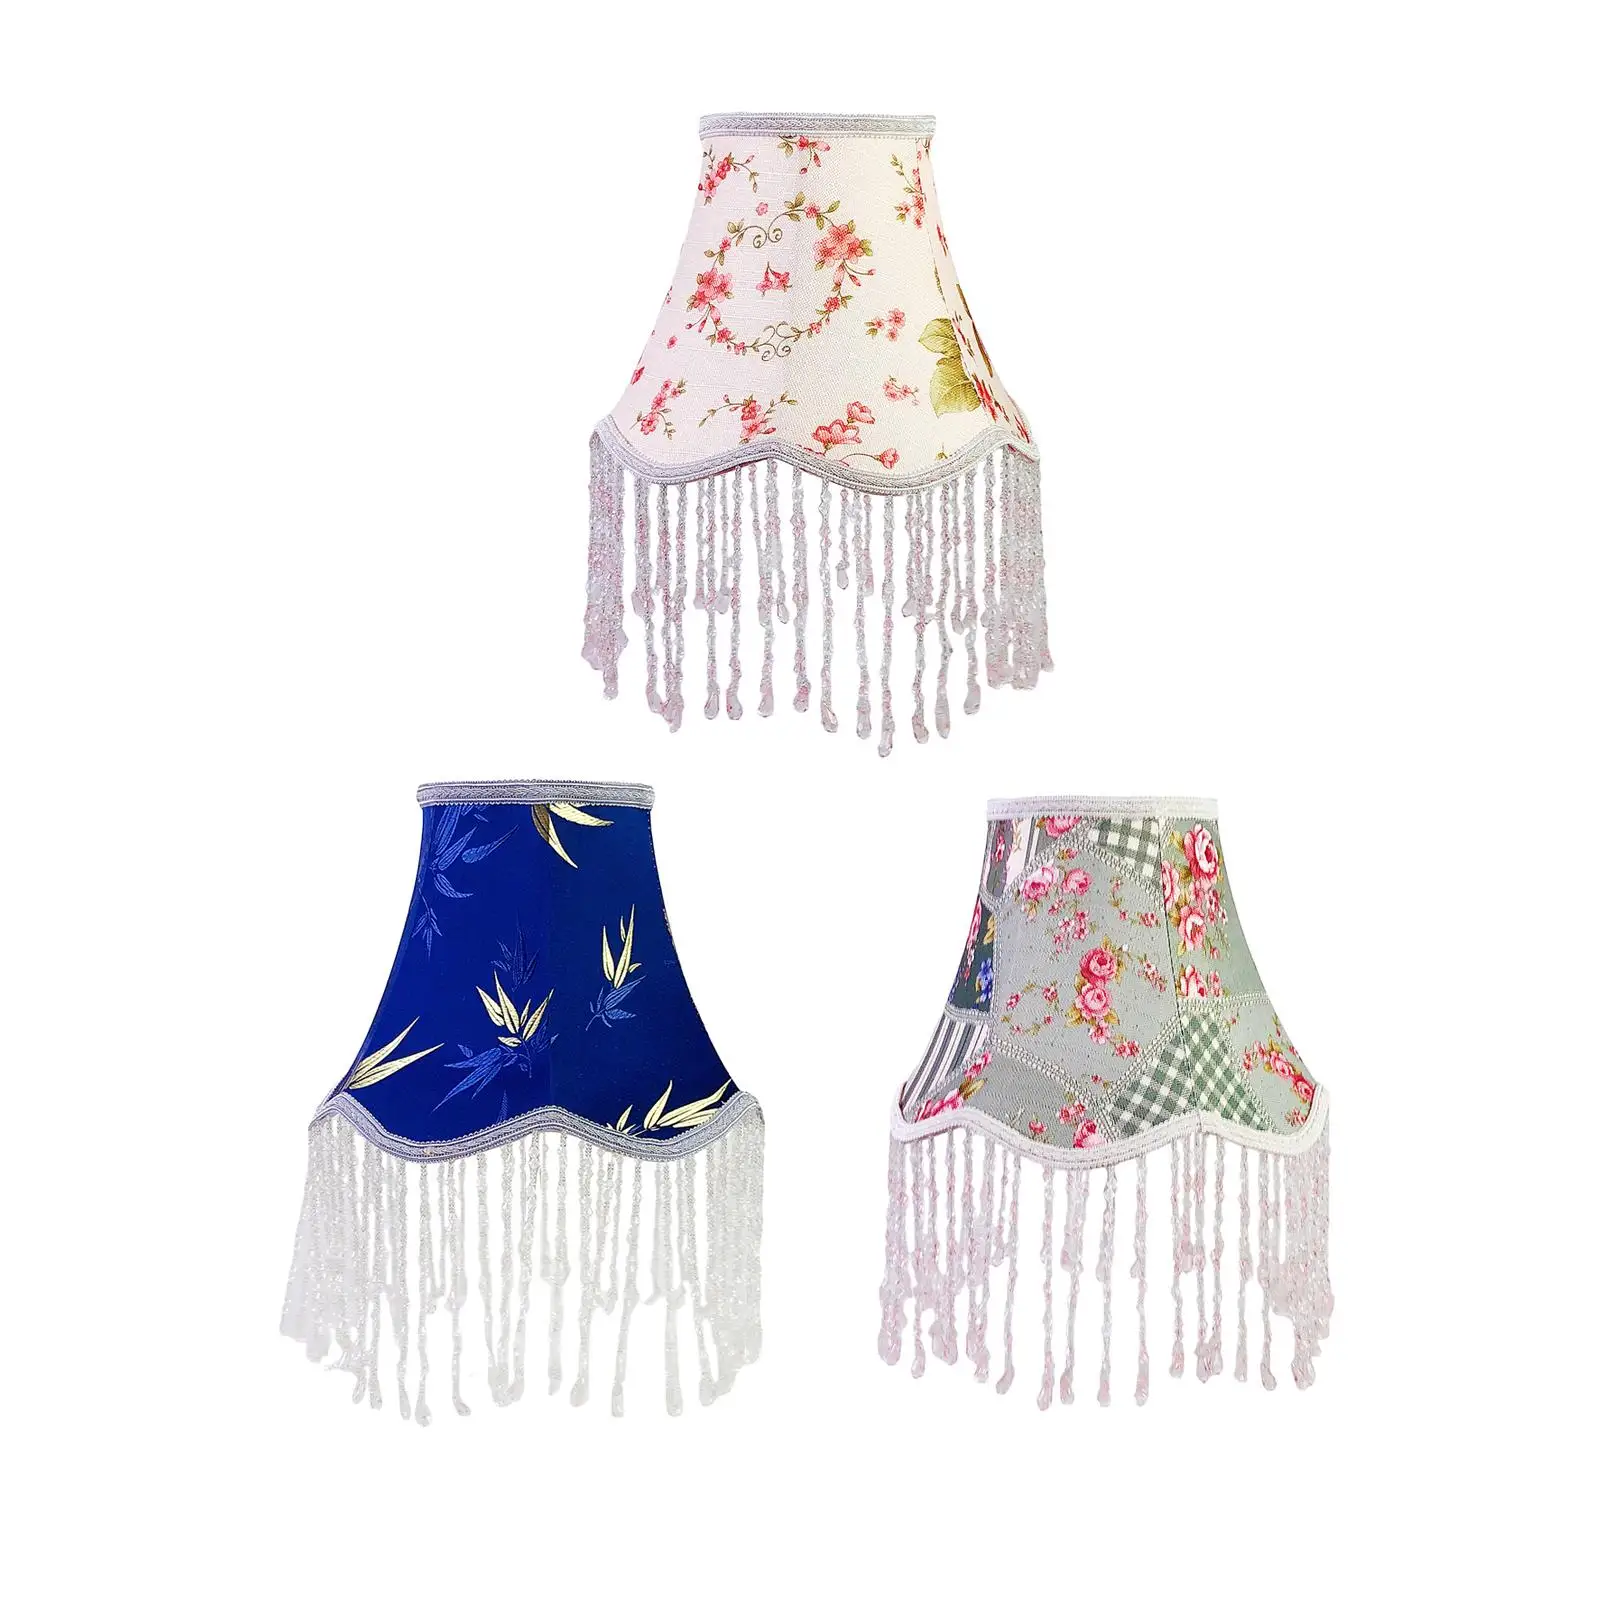 European Lampshade Vintage Fringe Beads Lamp Shade for Bedroom Cafe Home